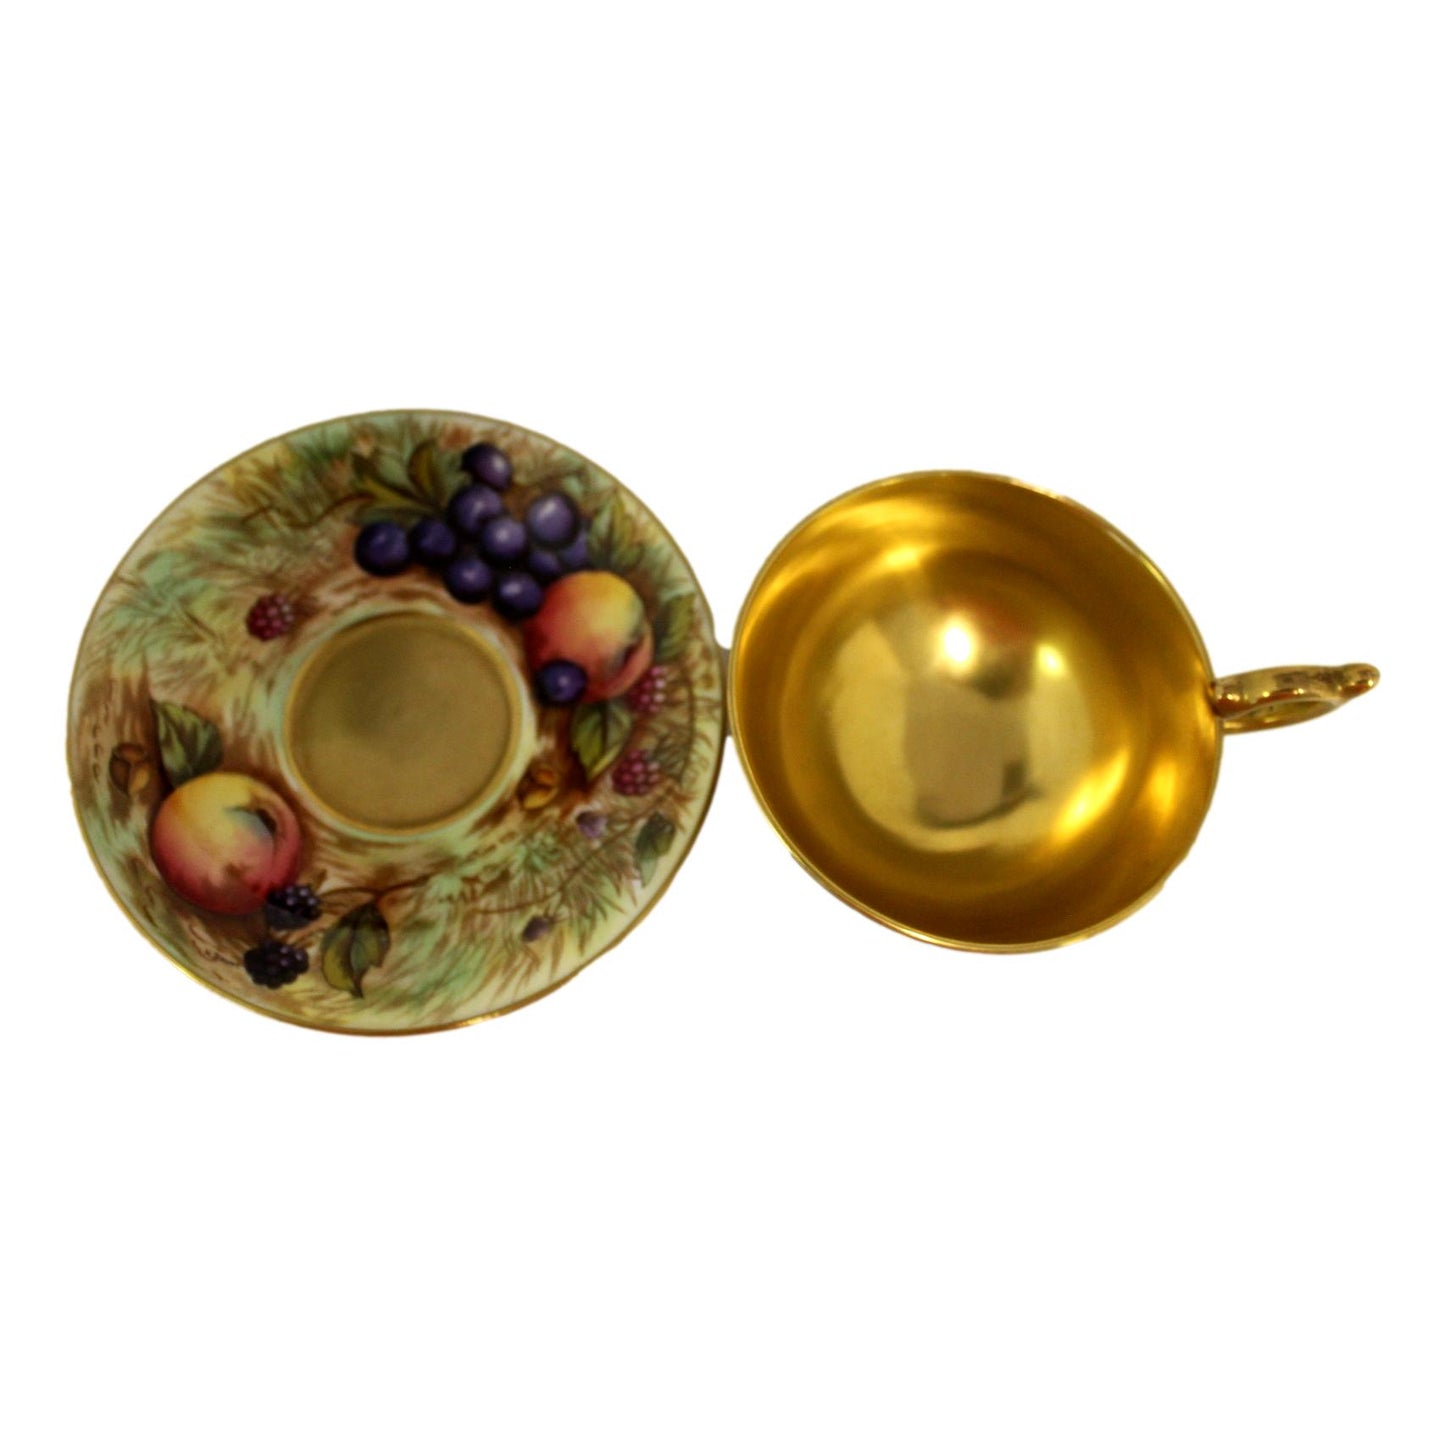 Aynsley Golden Fruit Cup and Saucer